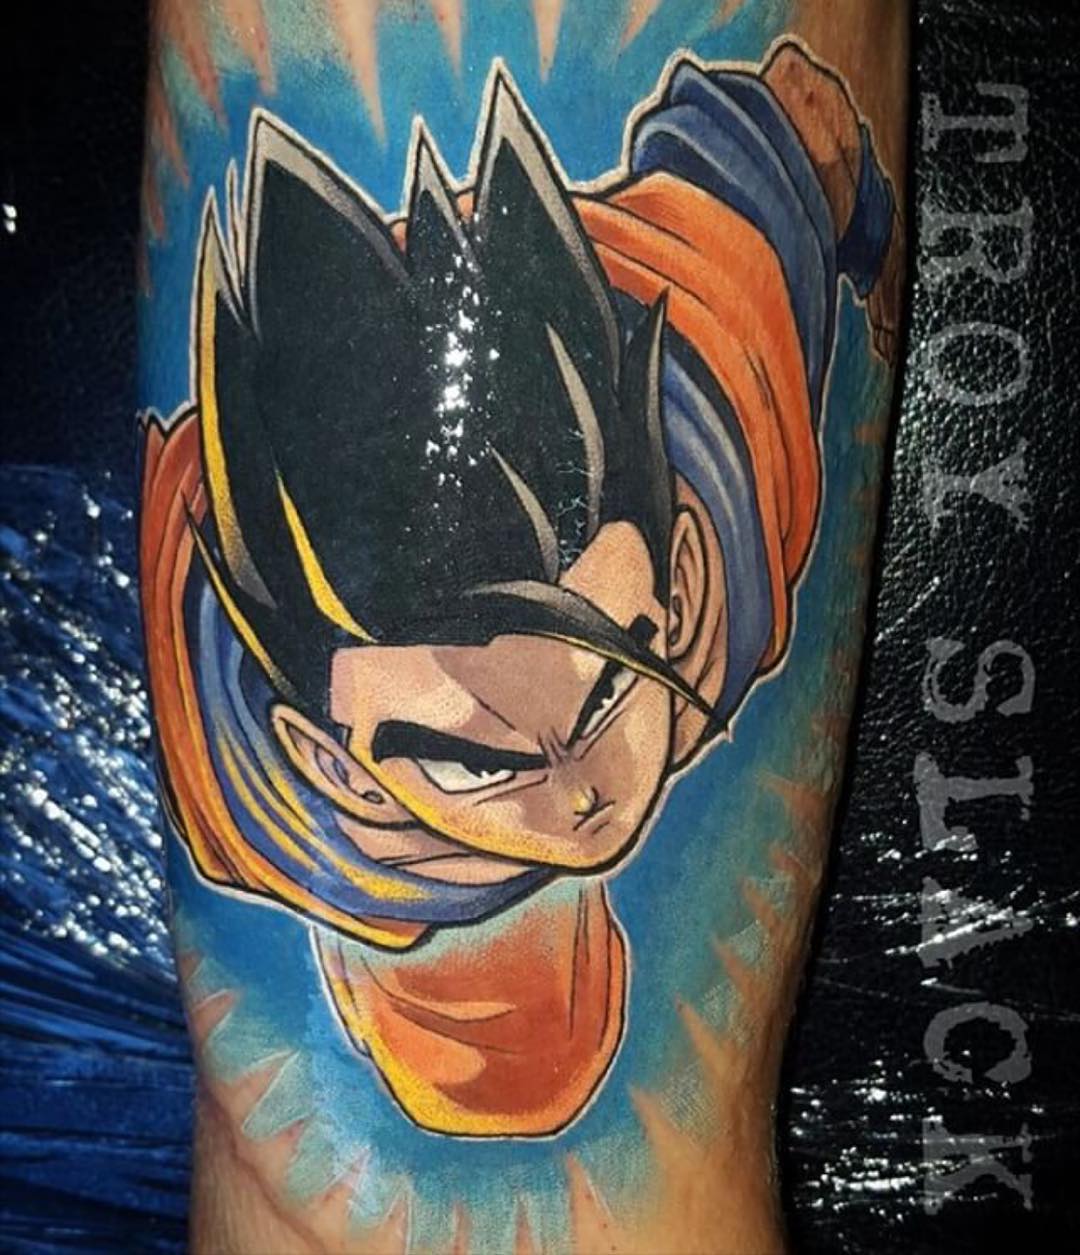 the tattoo of the Dragon Ball Z main character